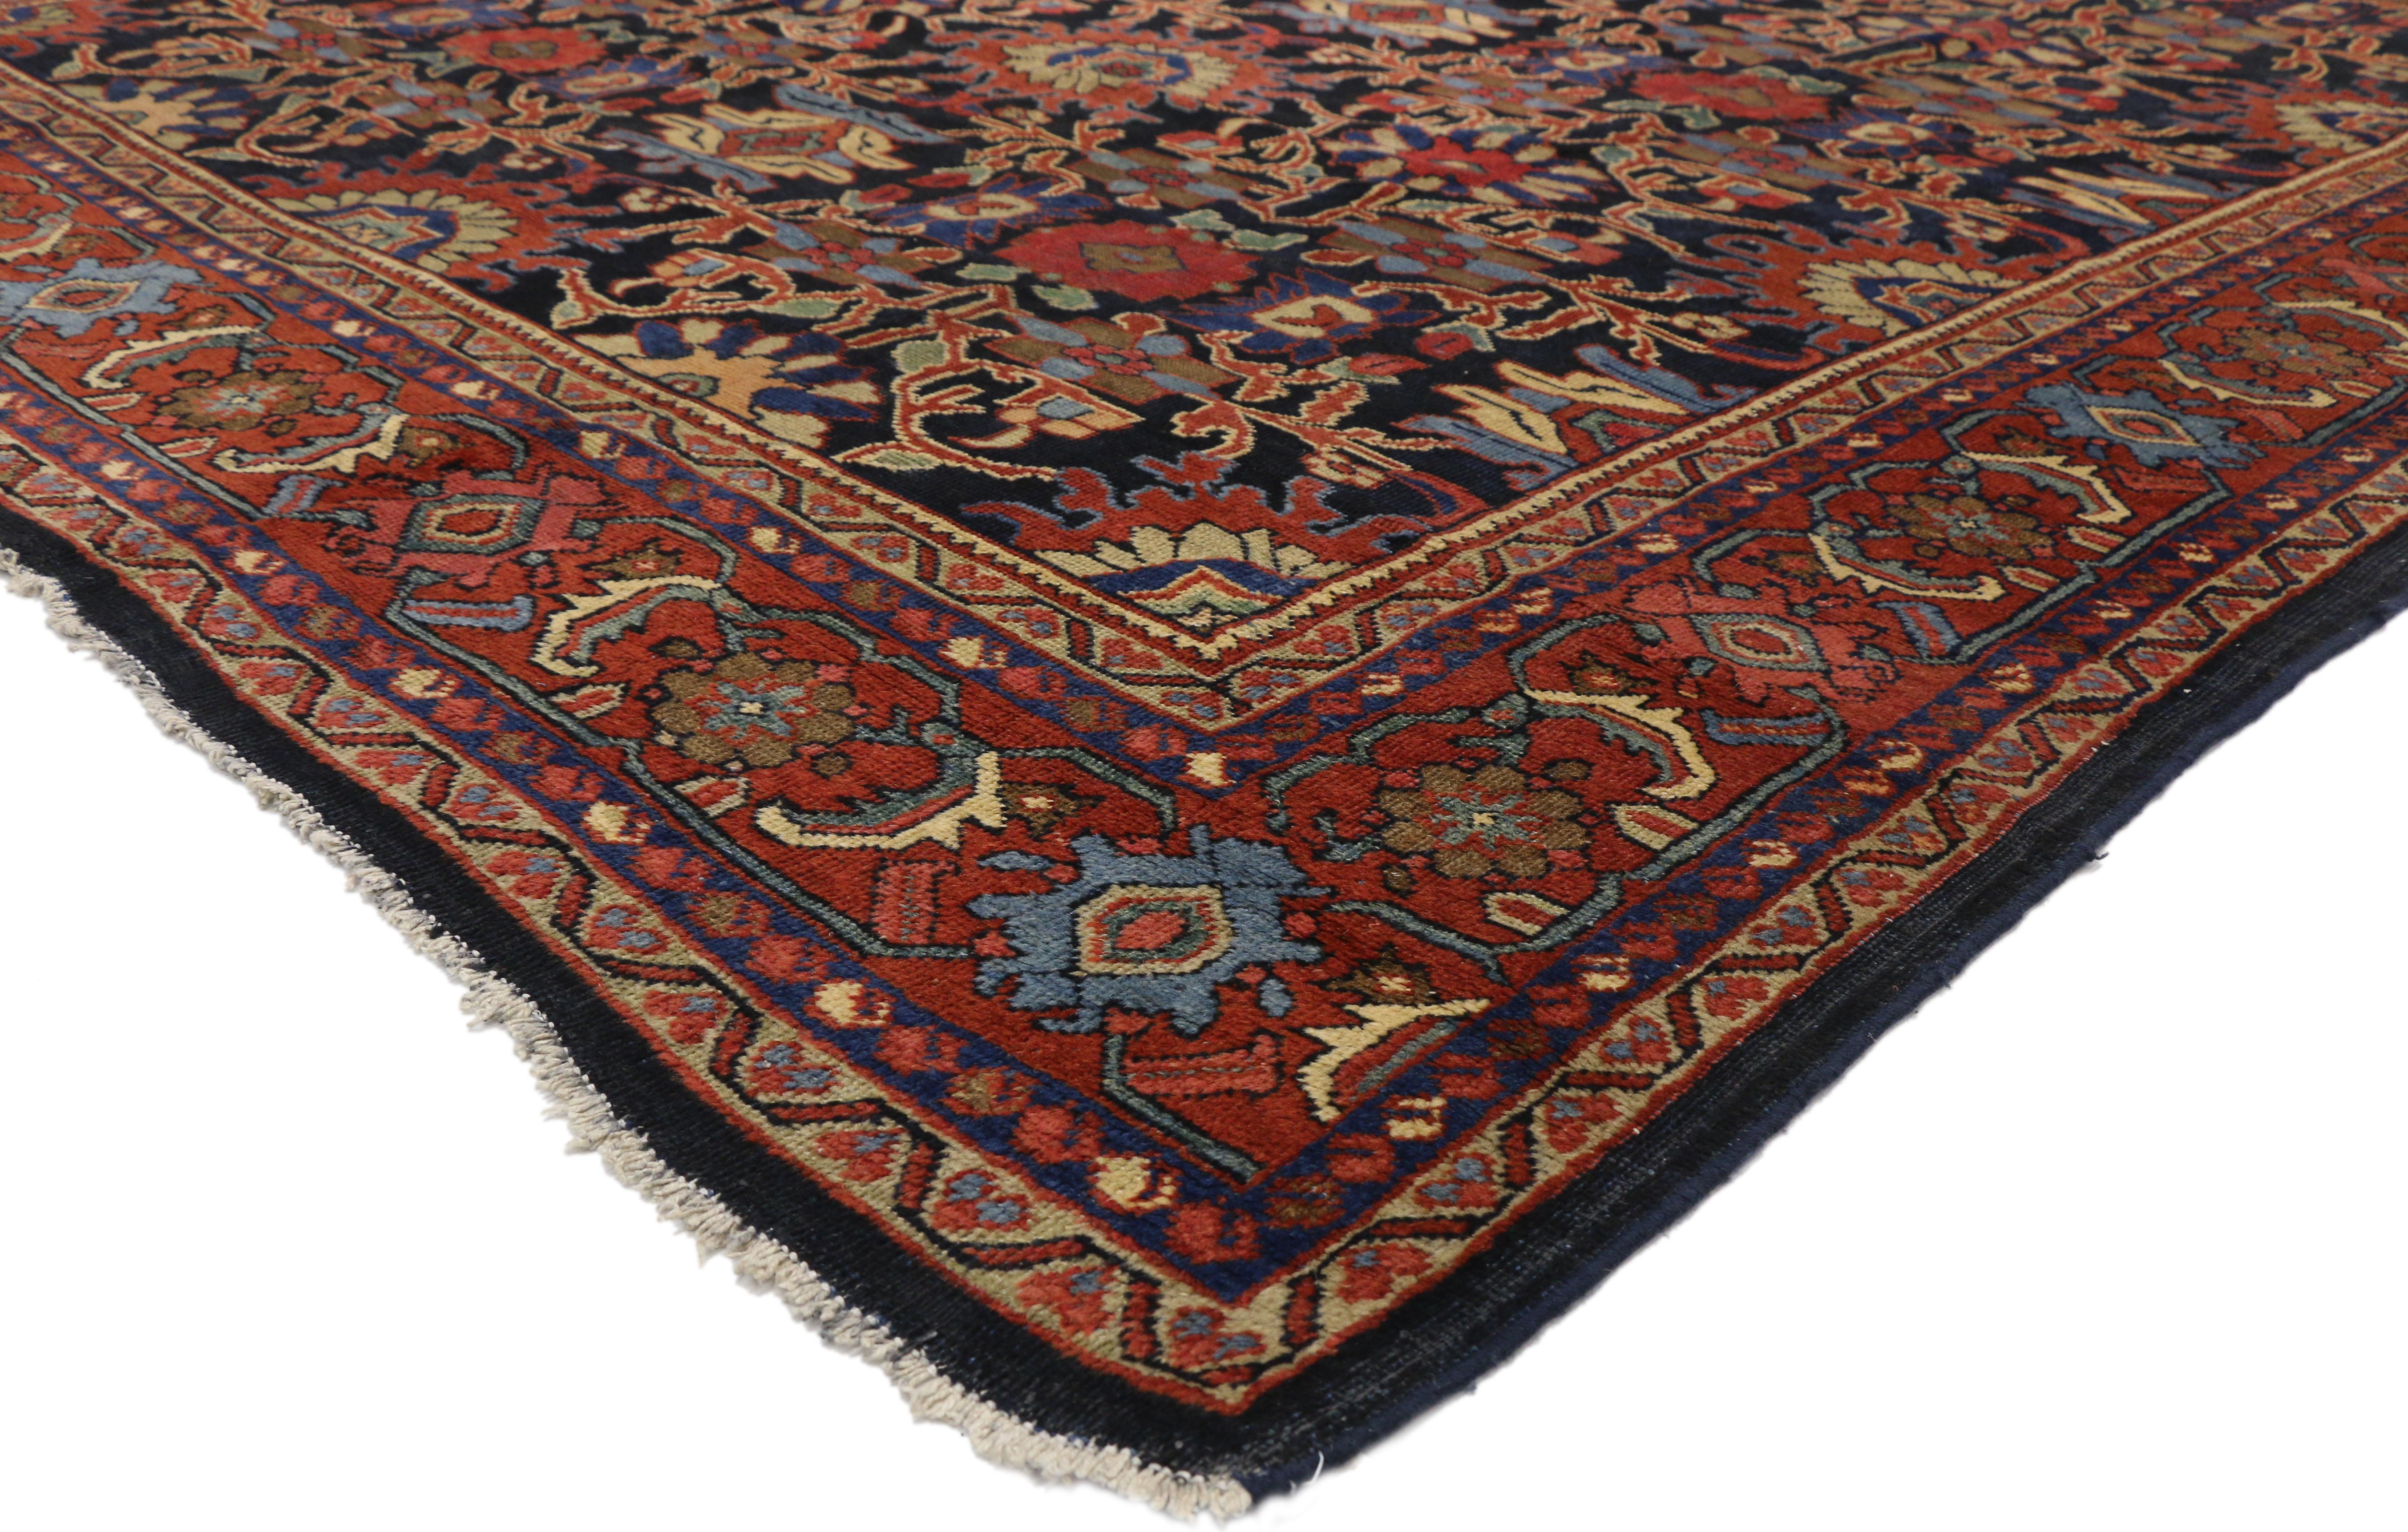 72546  Distressed Antique Persian Mahal Rug with Rustic English Traditional Style 08'08 X 12'00. This hand-knotted wool antique Persian Mahal rug beautifully embodies a modern rustic English traditional style. The dark navy blue field is covered in